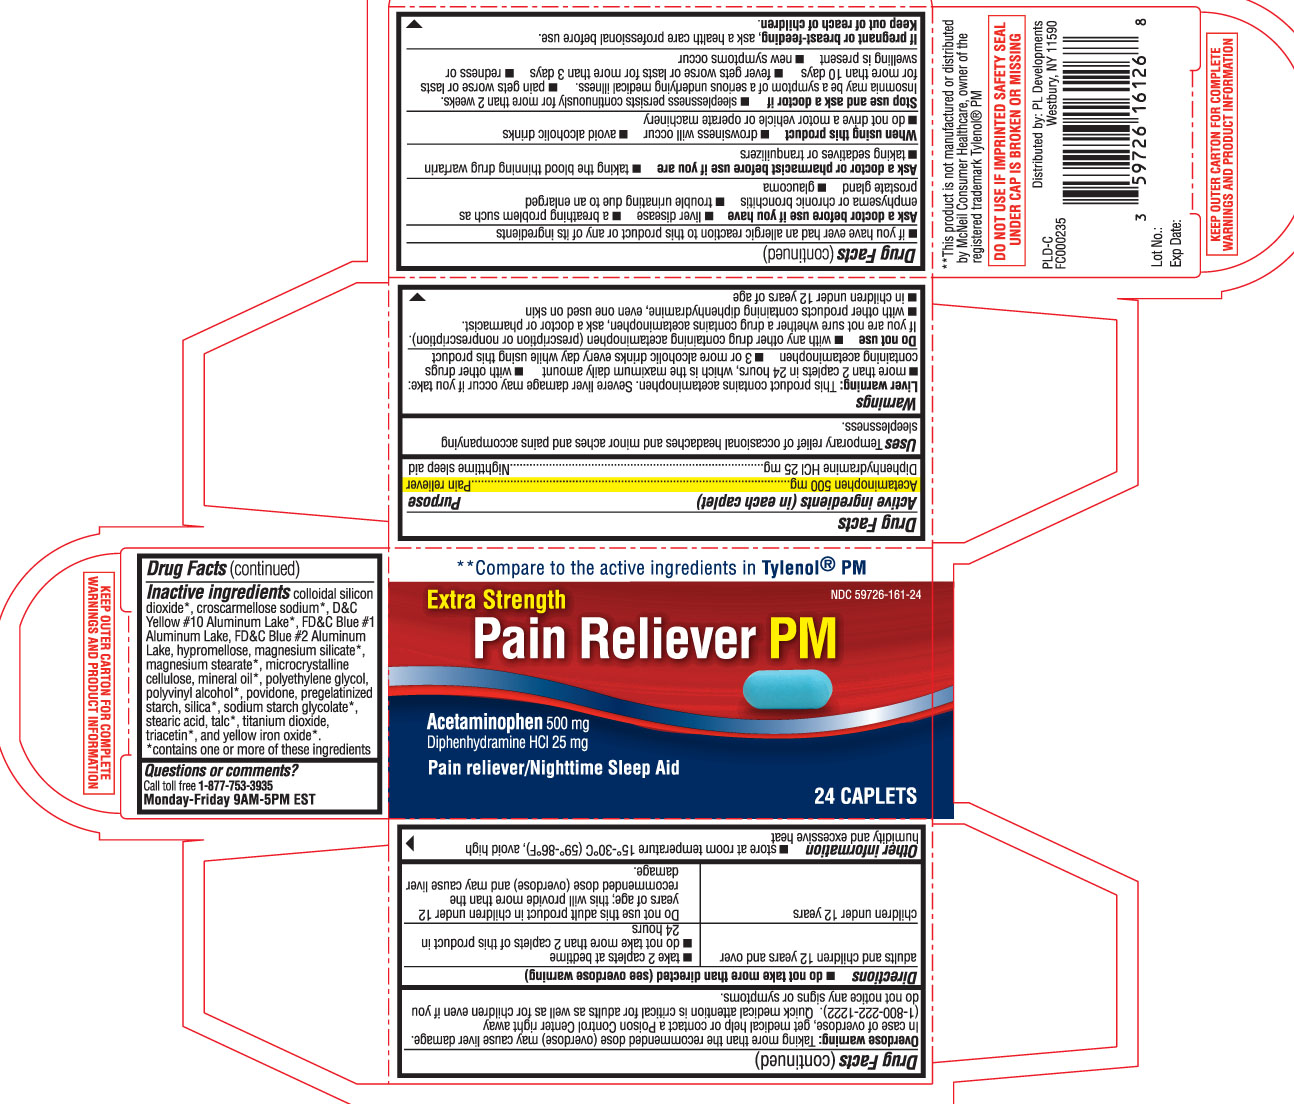 PLD pain reliever PM